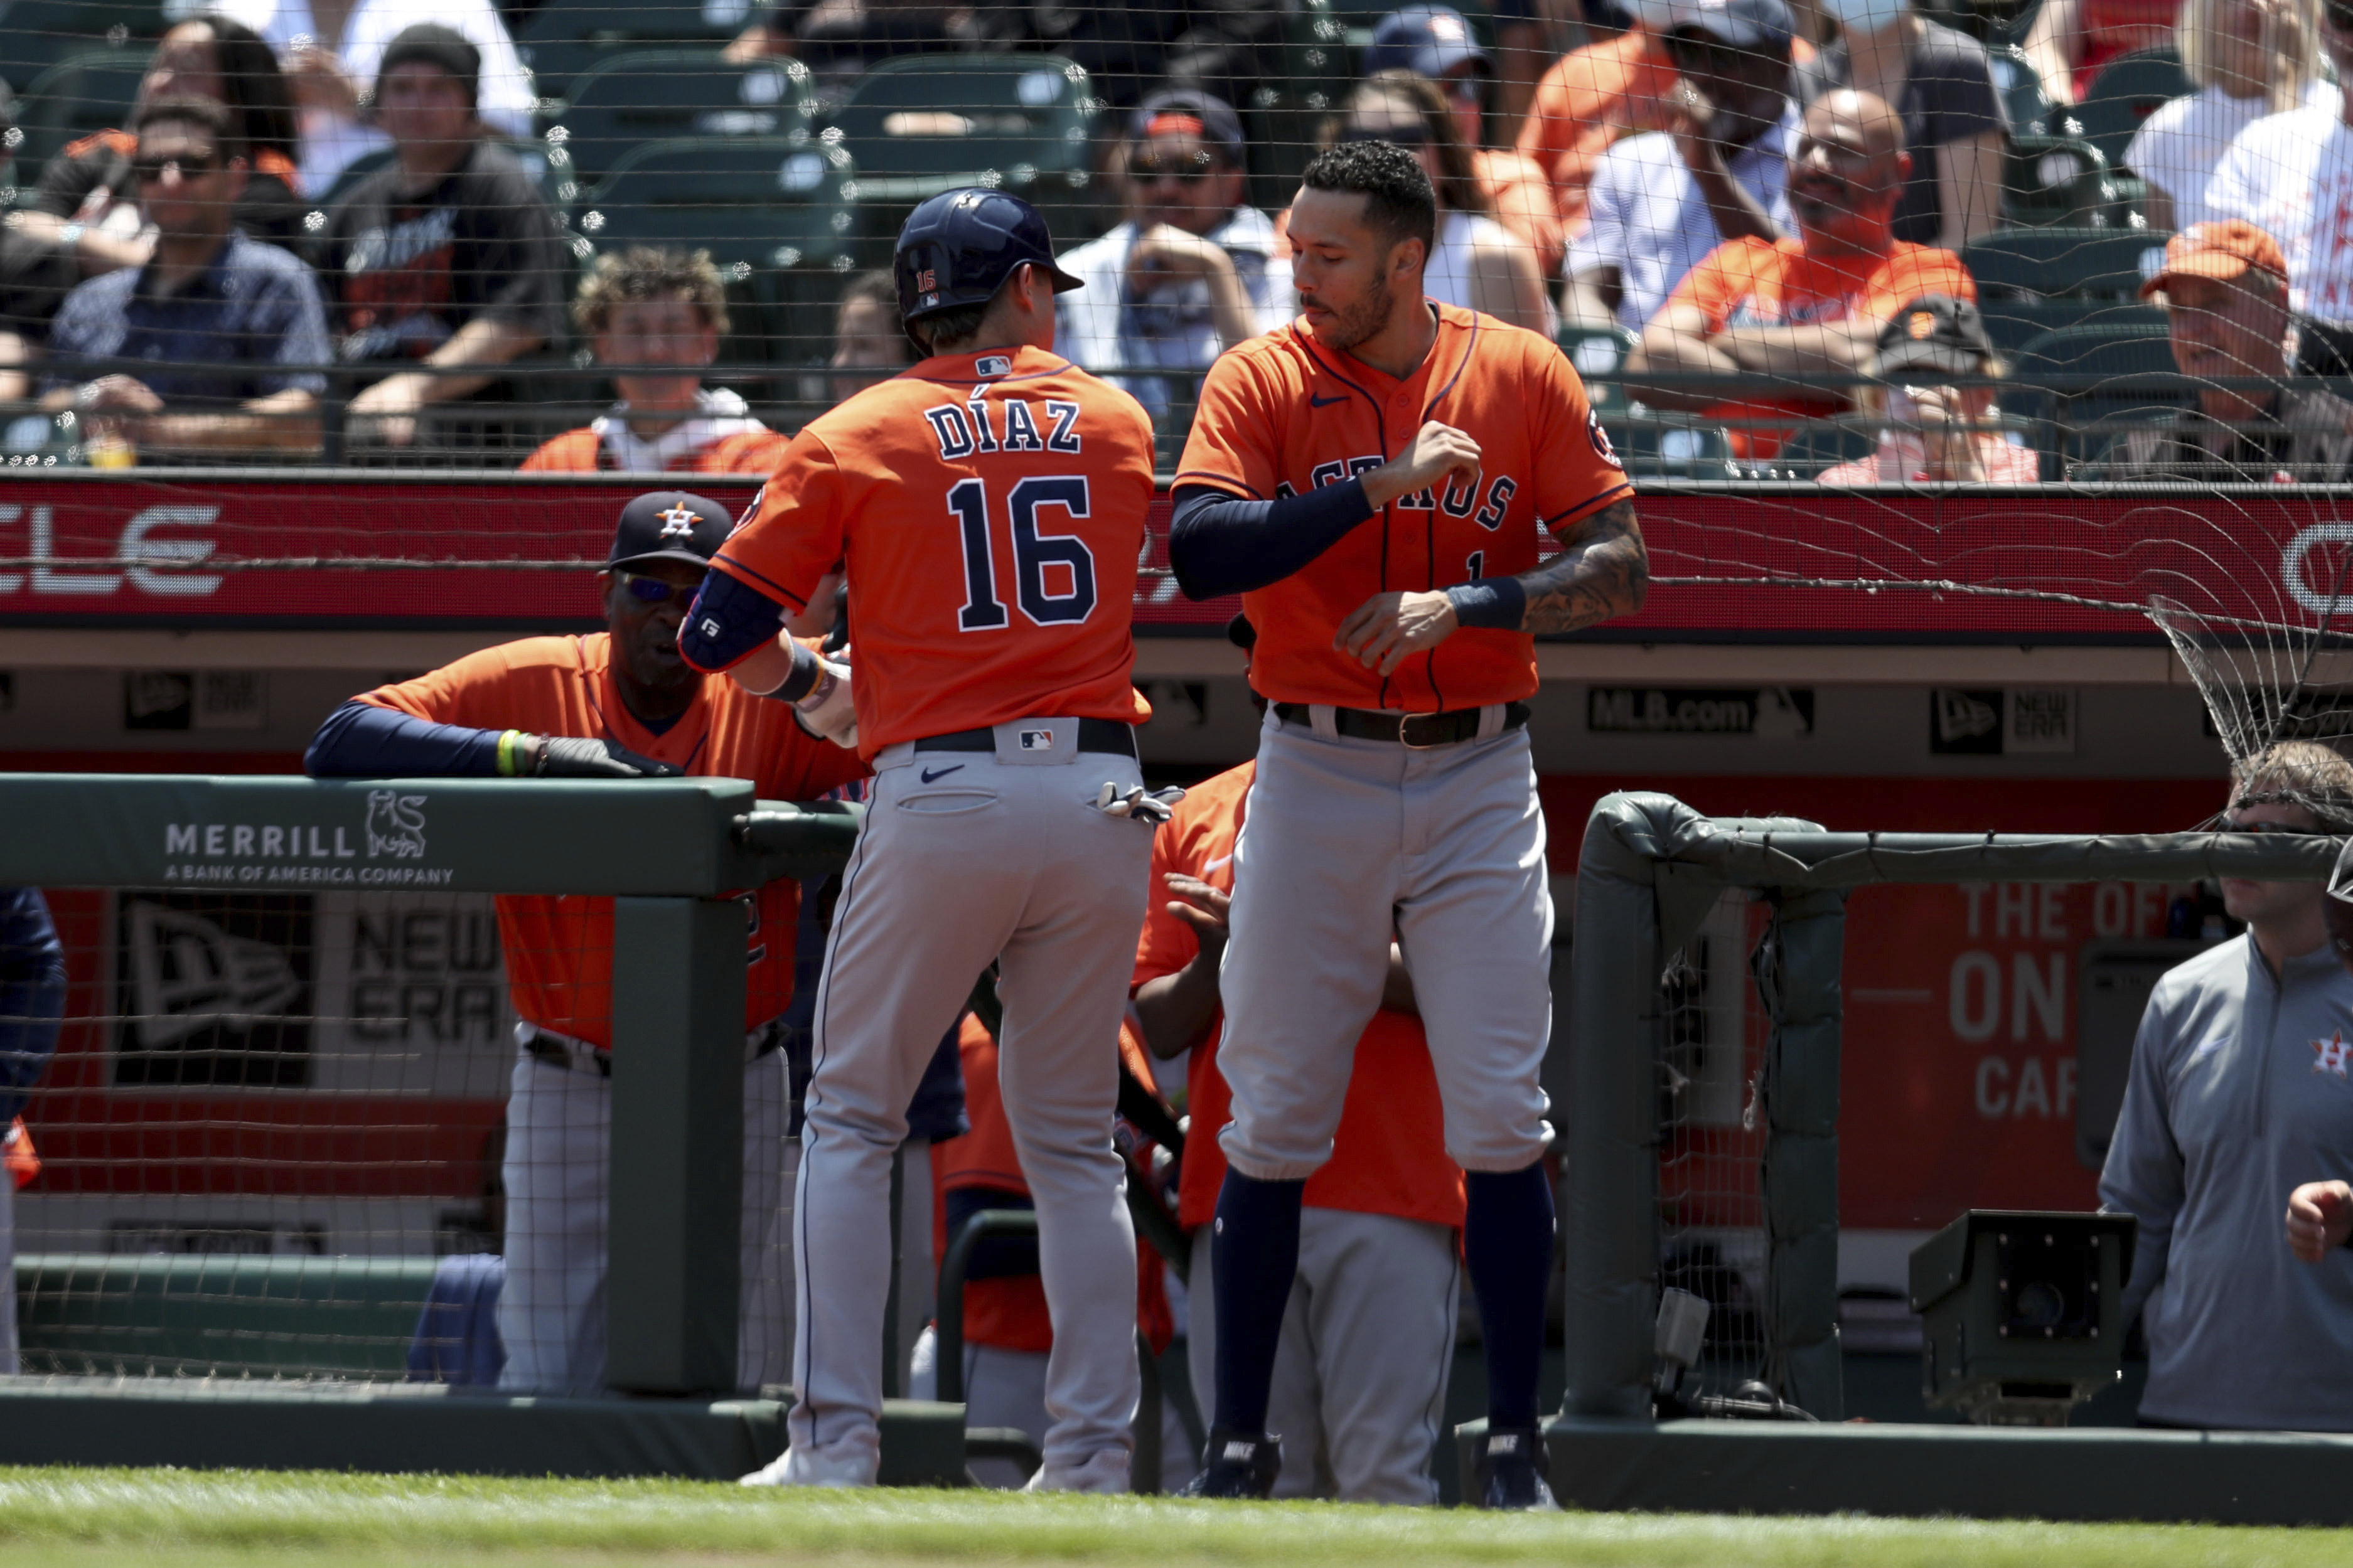 Jose Altuve homers twice to lead Astros past Giants - McCovey